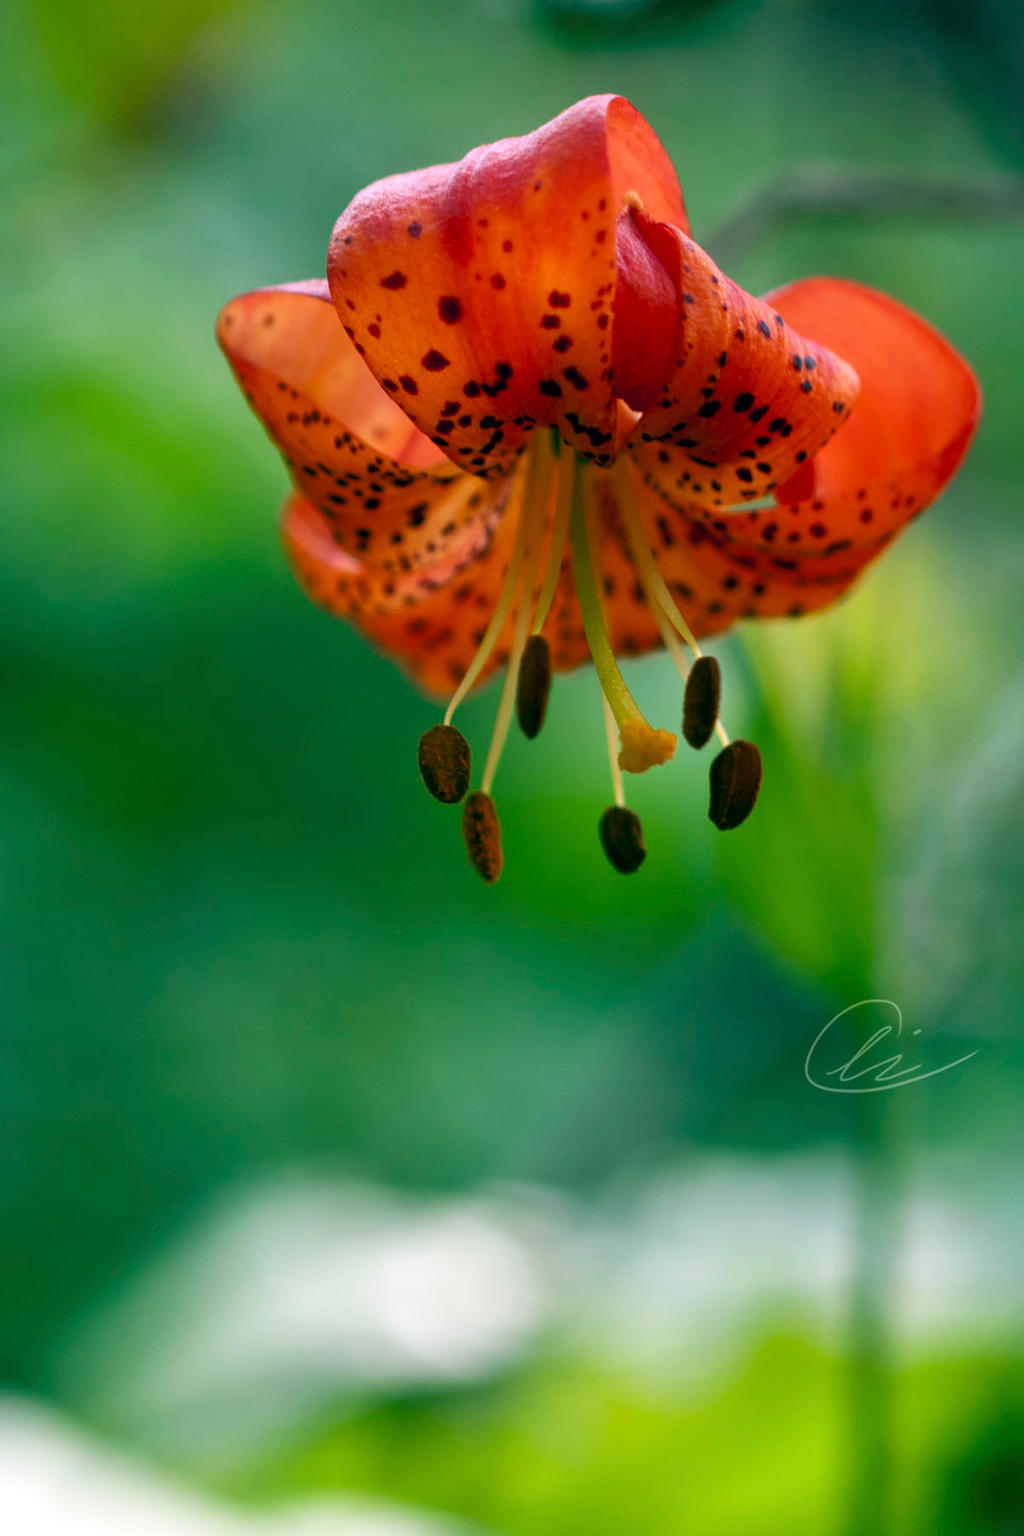 Leopard Lily